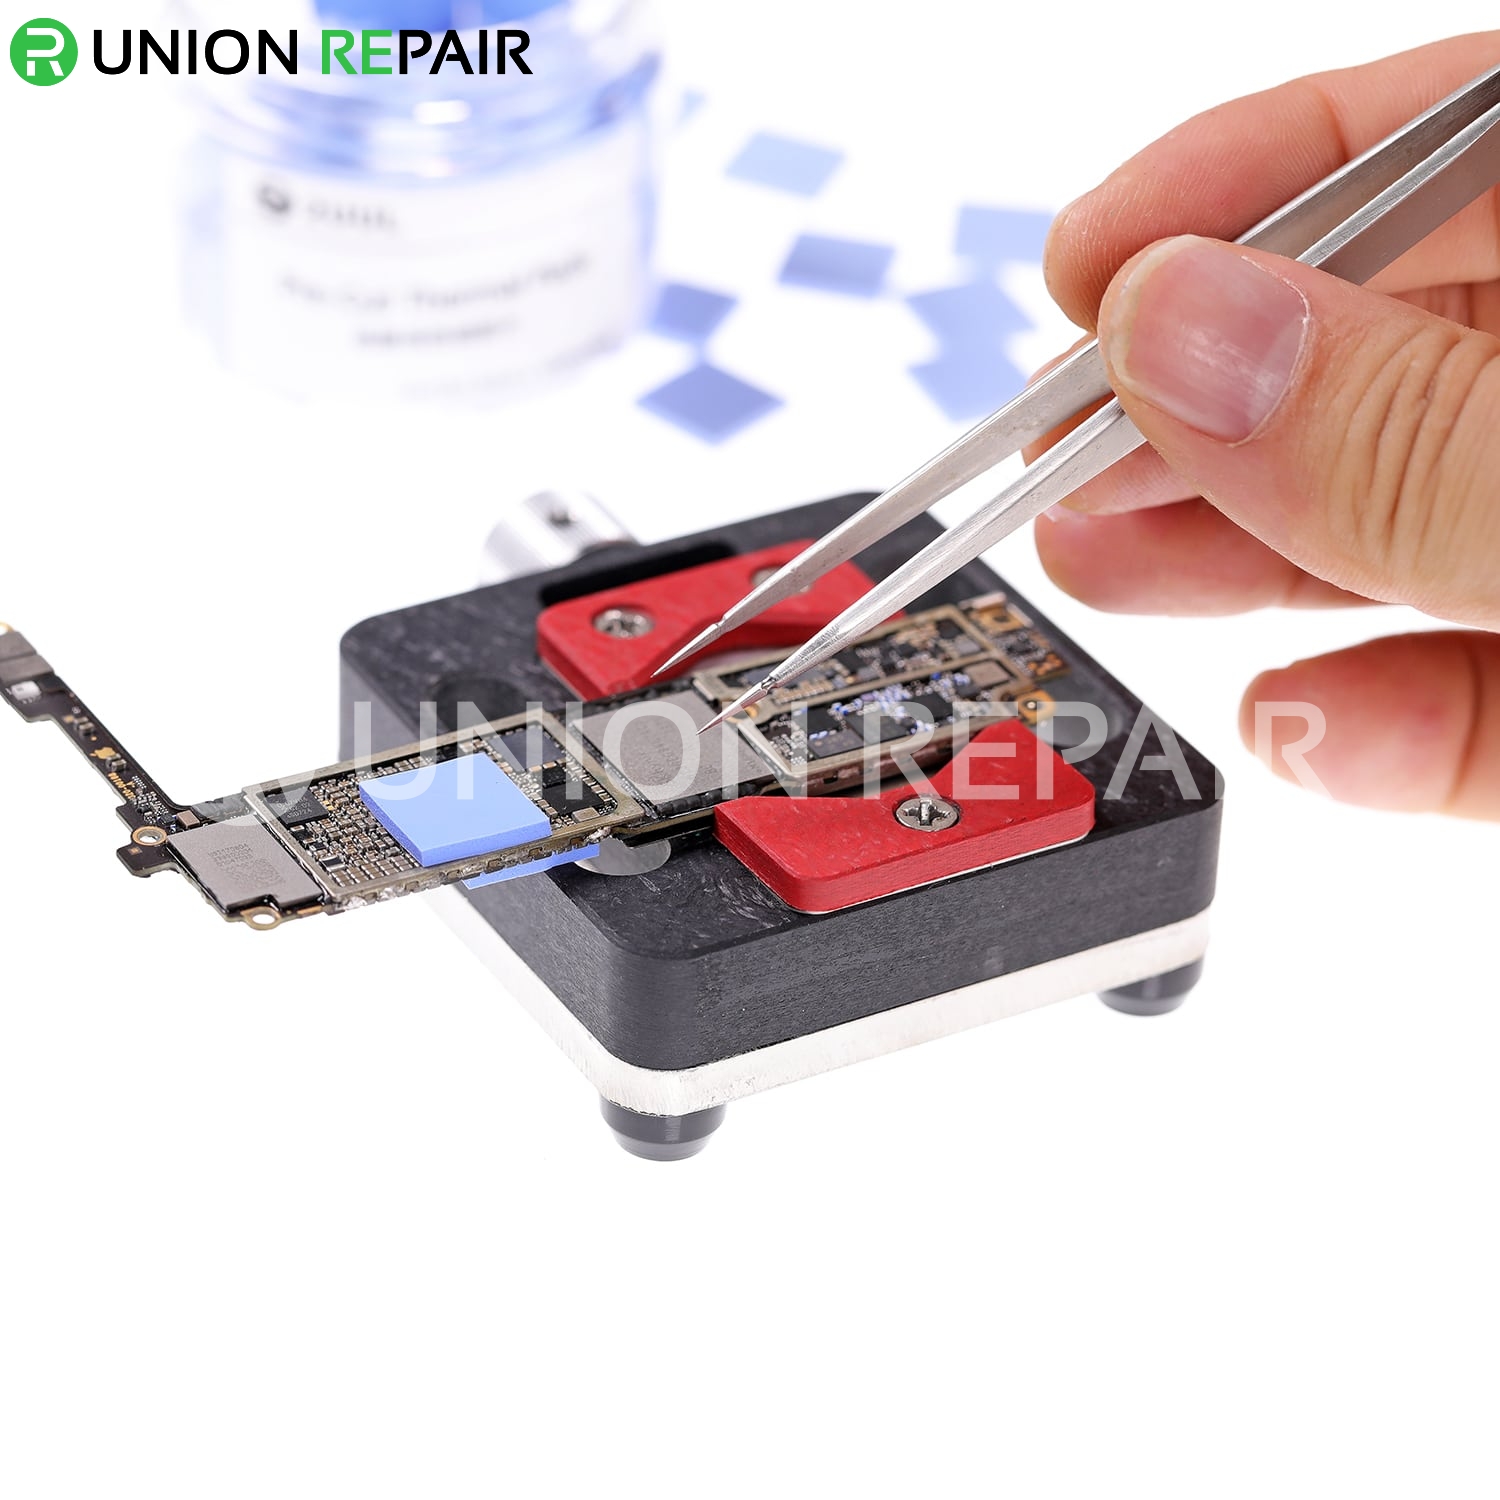 https://images.unionrepair.com/images/watermarked/1/detailed/49/u0204-2uul-pre-cut-thermal-silicone-pads-12x12x1.5mm-100pcs-box-r4.jpg?t=1701254441